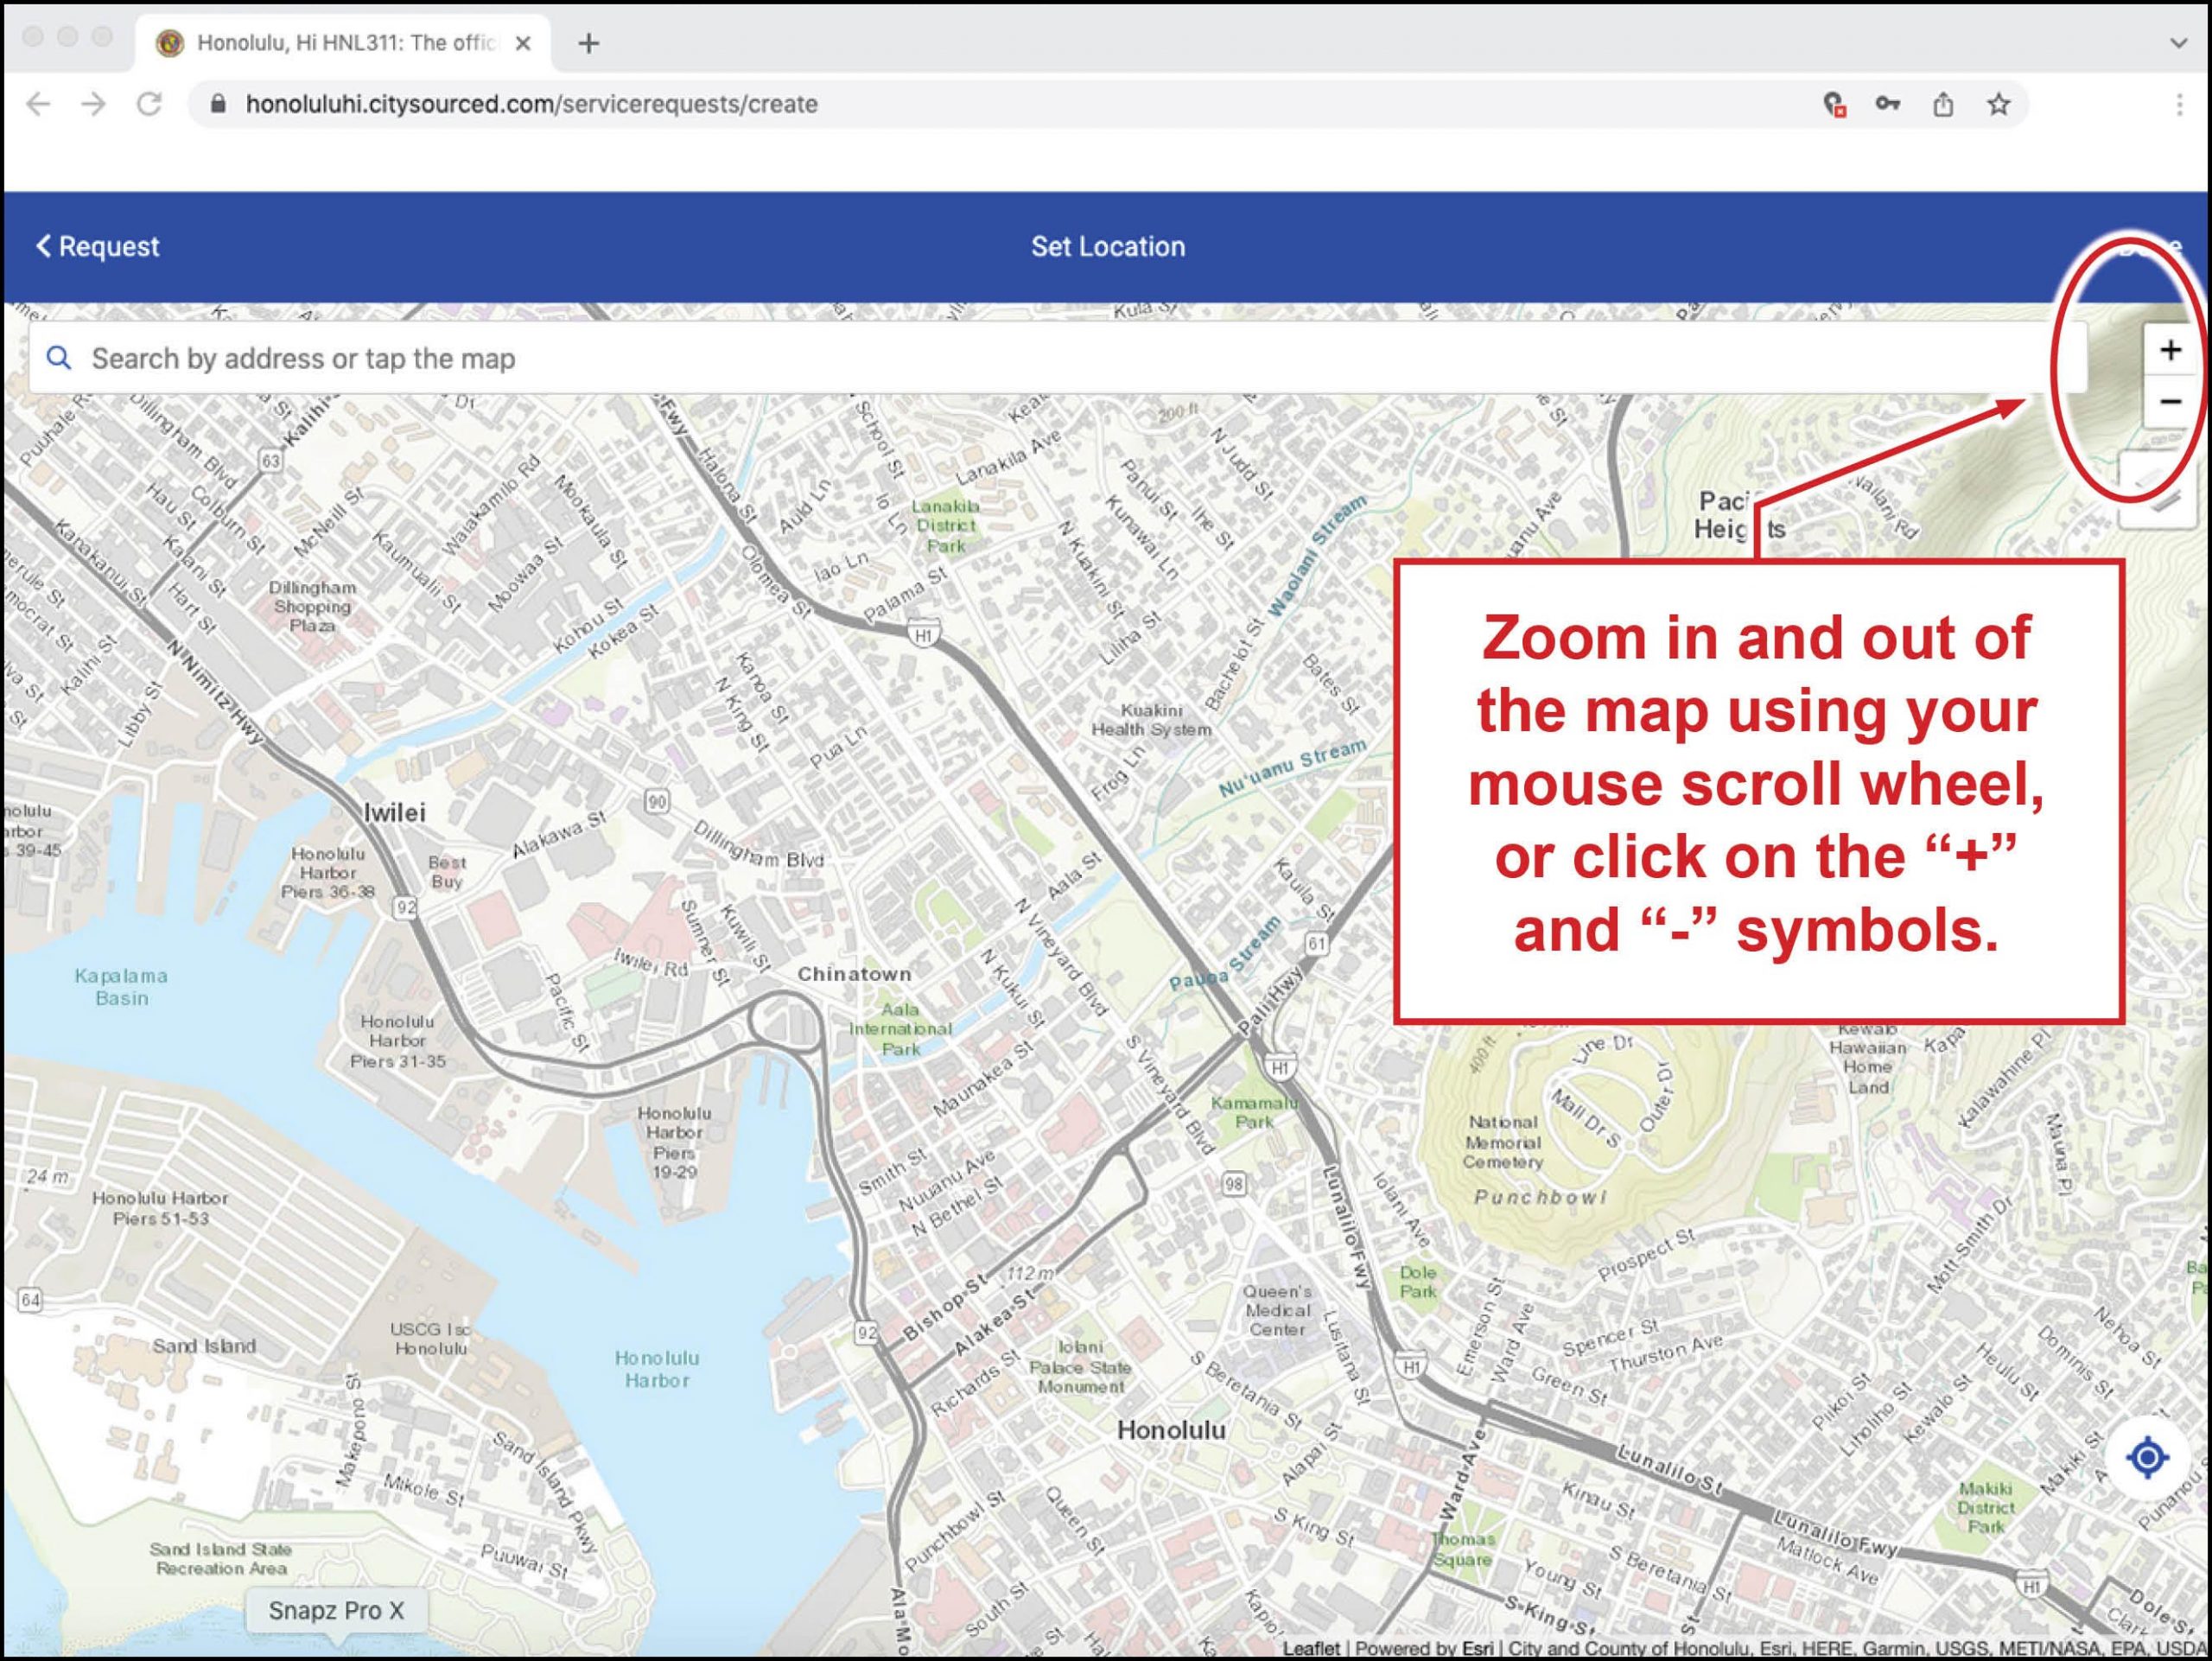 Zoom in and out of the map using your mouse scroll wheel, or click on the plus and minus symbols.